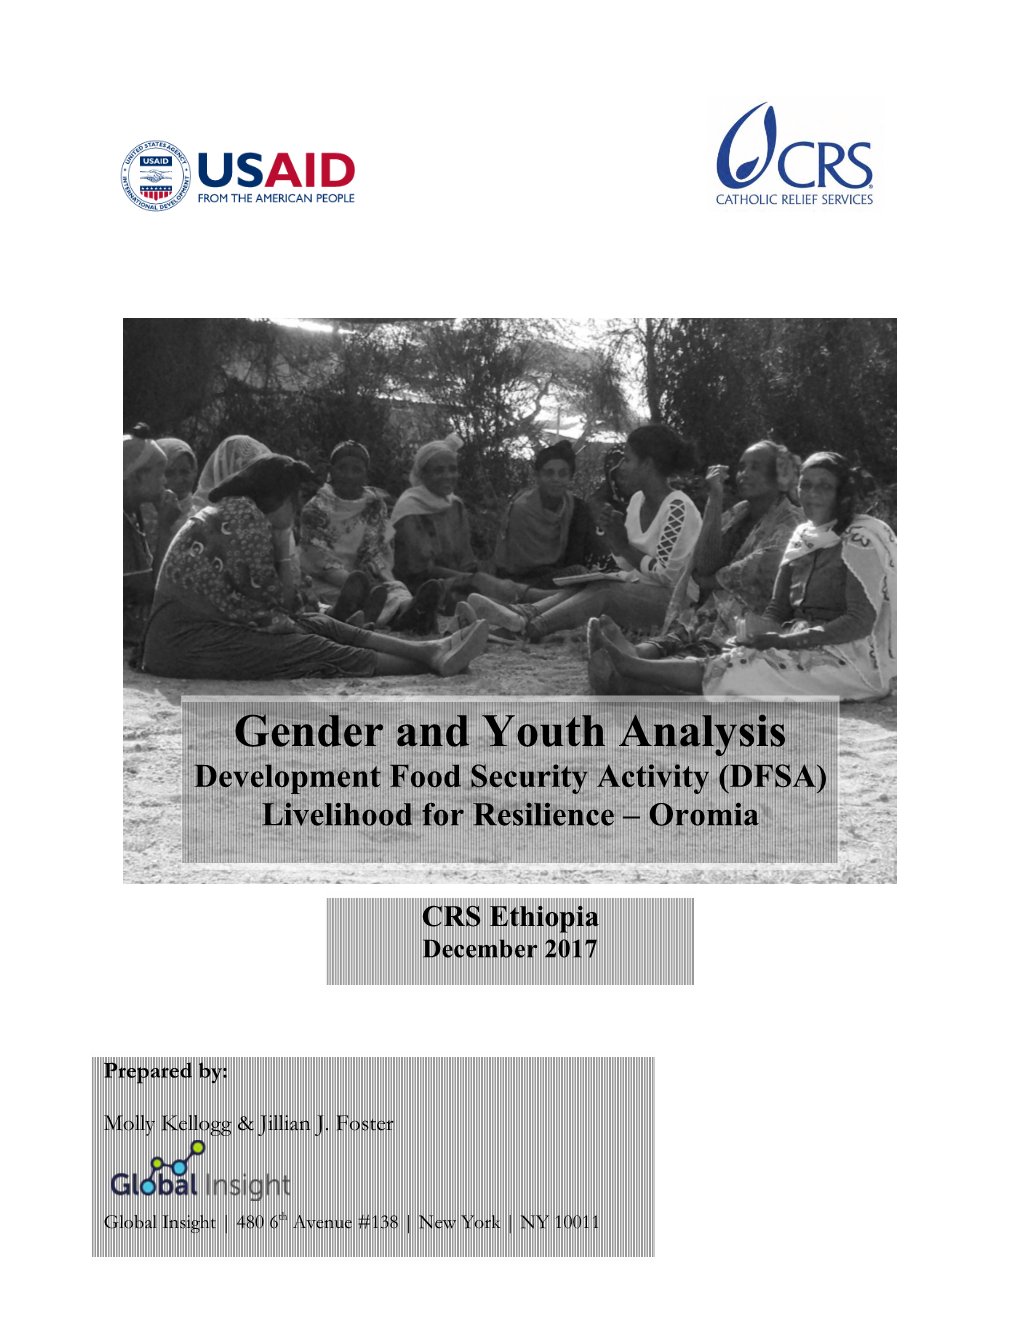 Gender and Youth Analysis Development Food Security Activity (DFSA) Livelihood for Resilience – Oromia